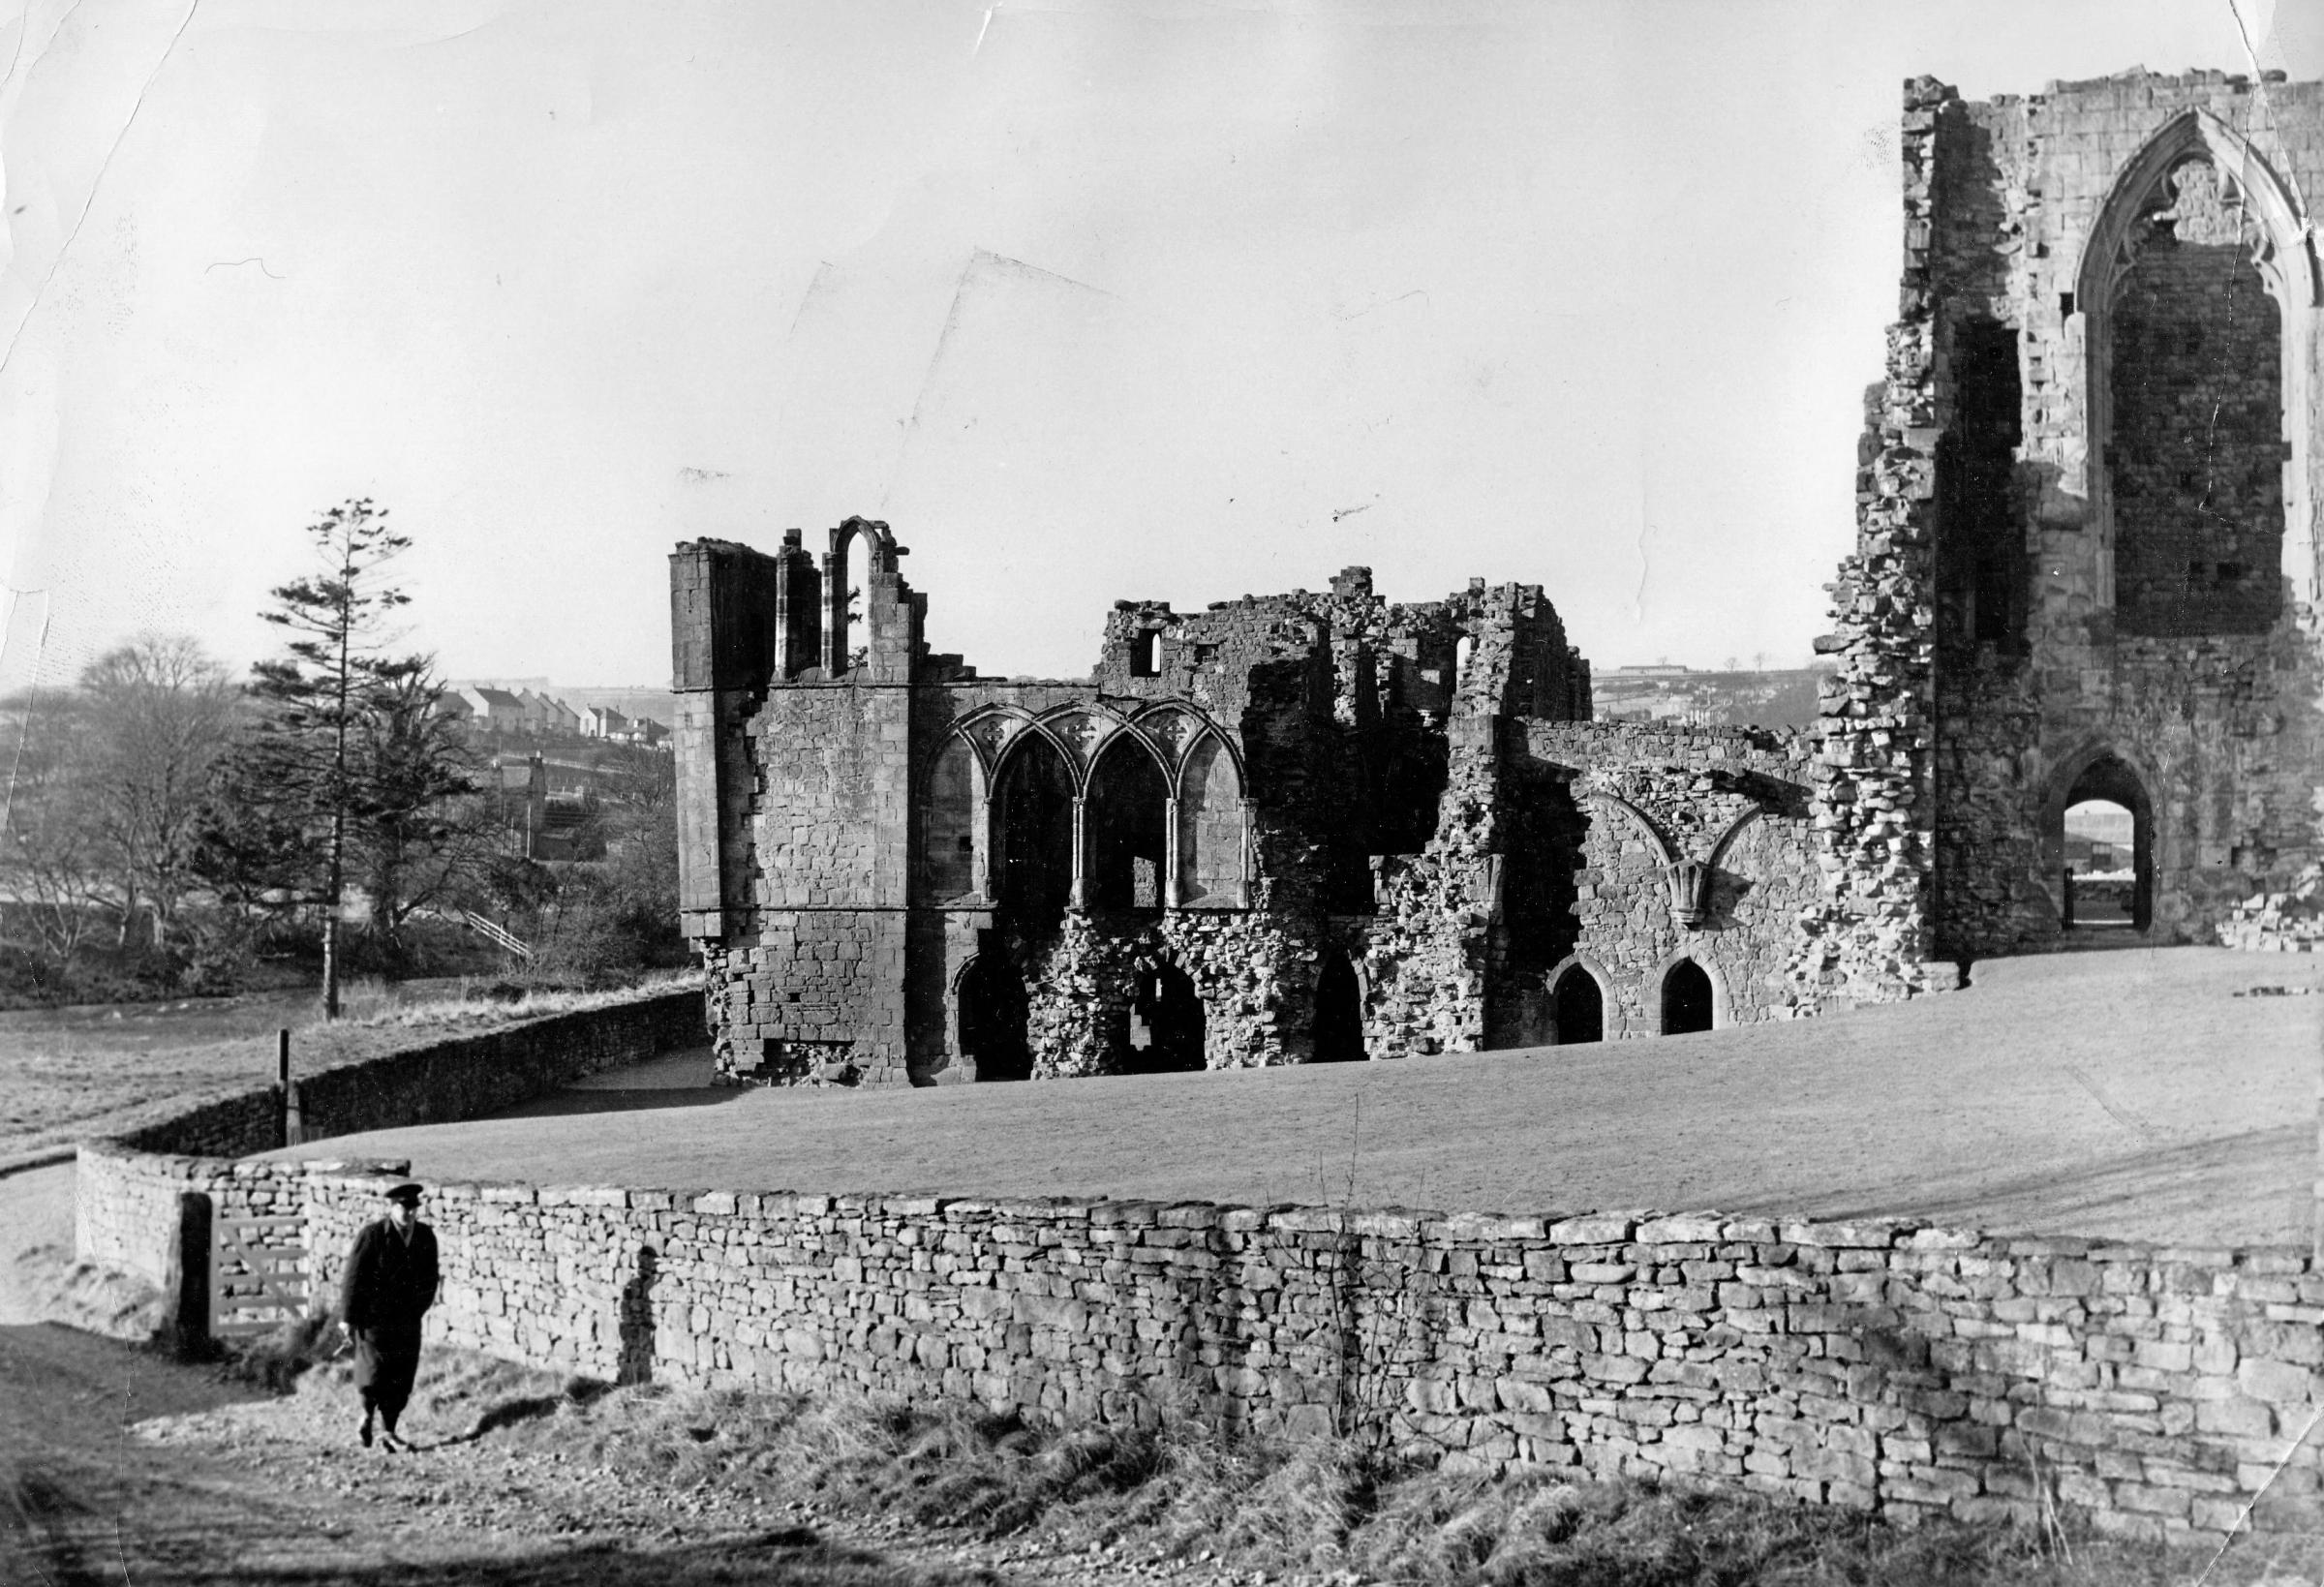 Easby Abbey in 1962. It was part of the Jacques estate which included St Trinians Hall